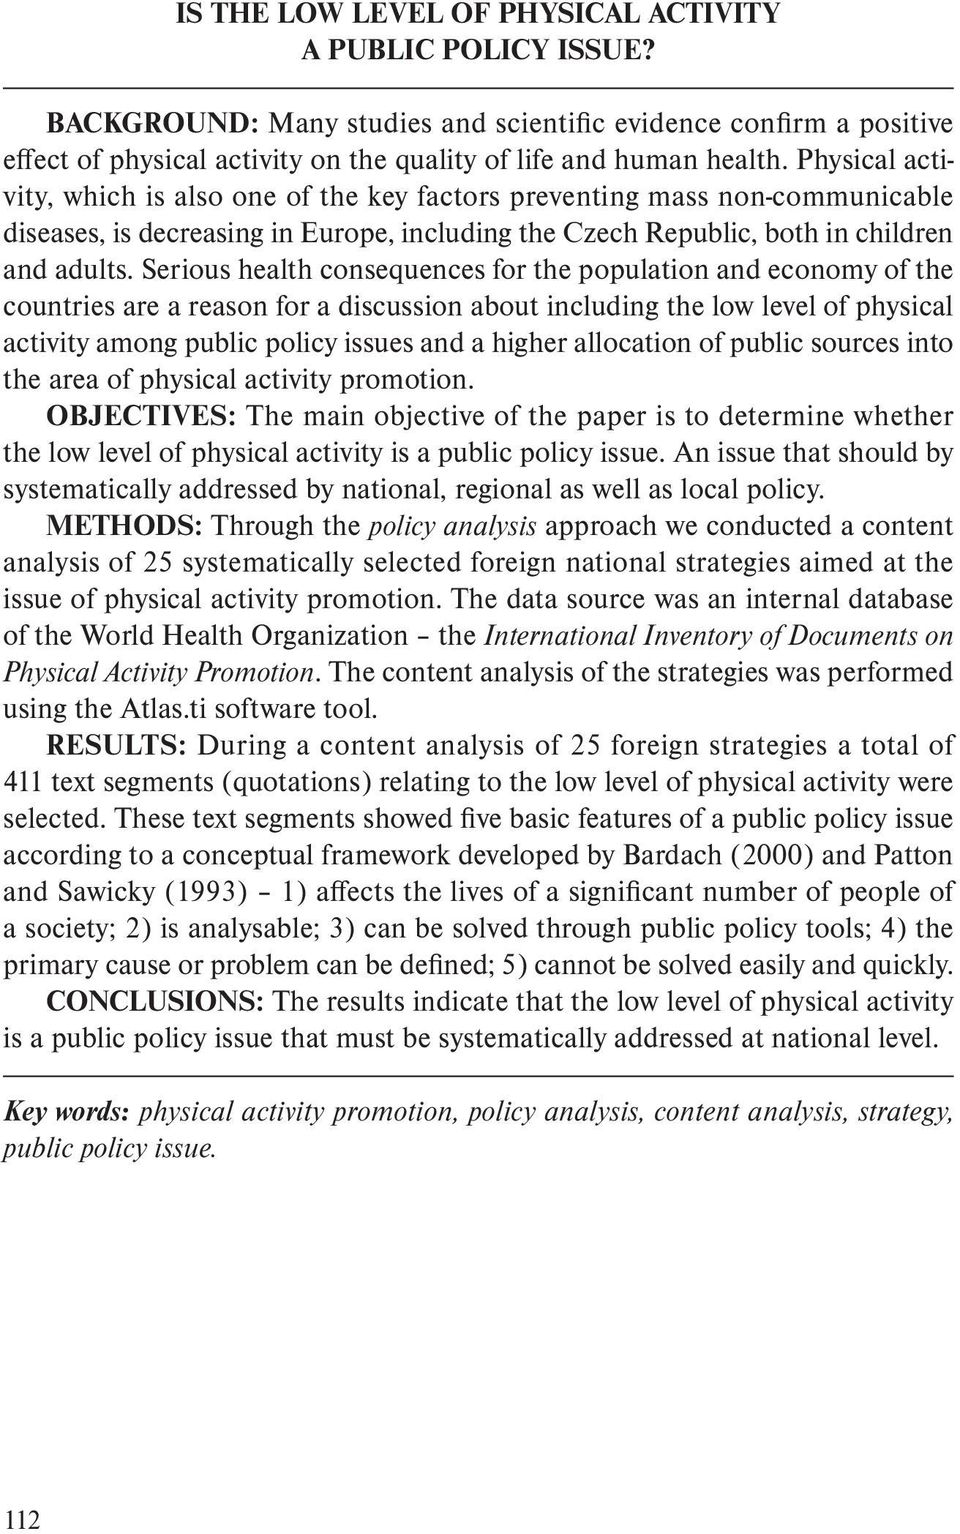 Serious health consequences for the population and economy of the countries are a reason for a discussion about including the low level of physical activity among public policy issues and a higher